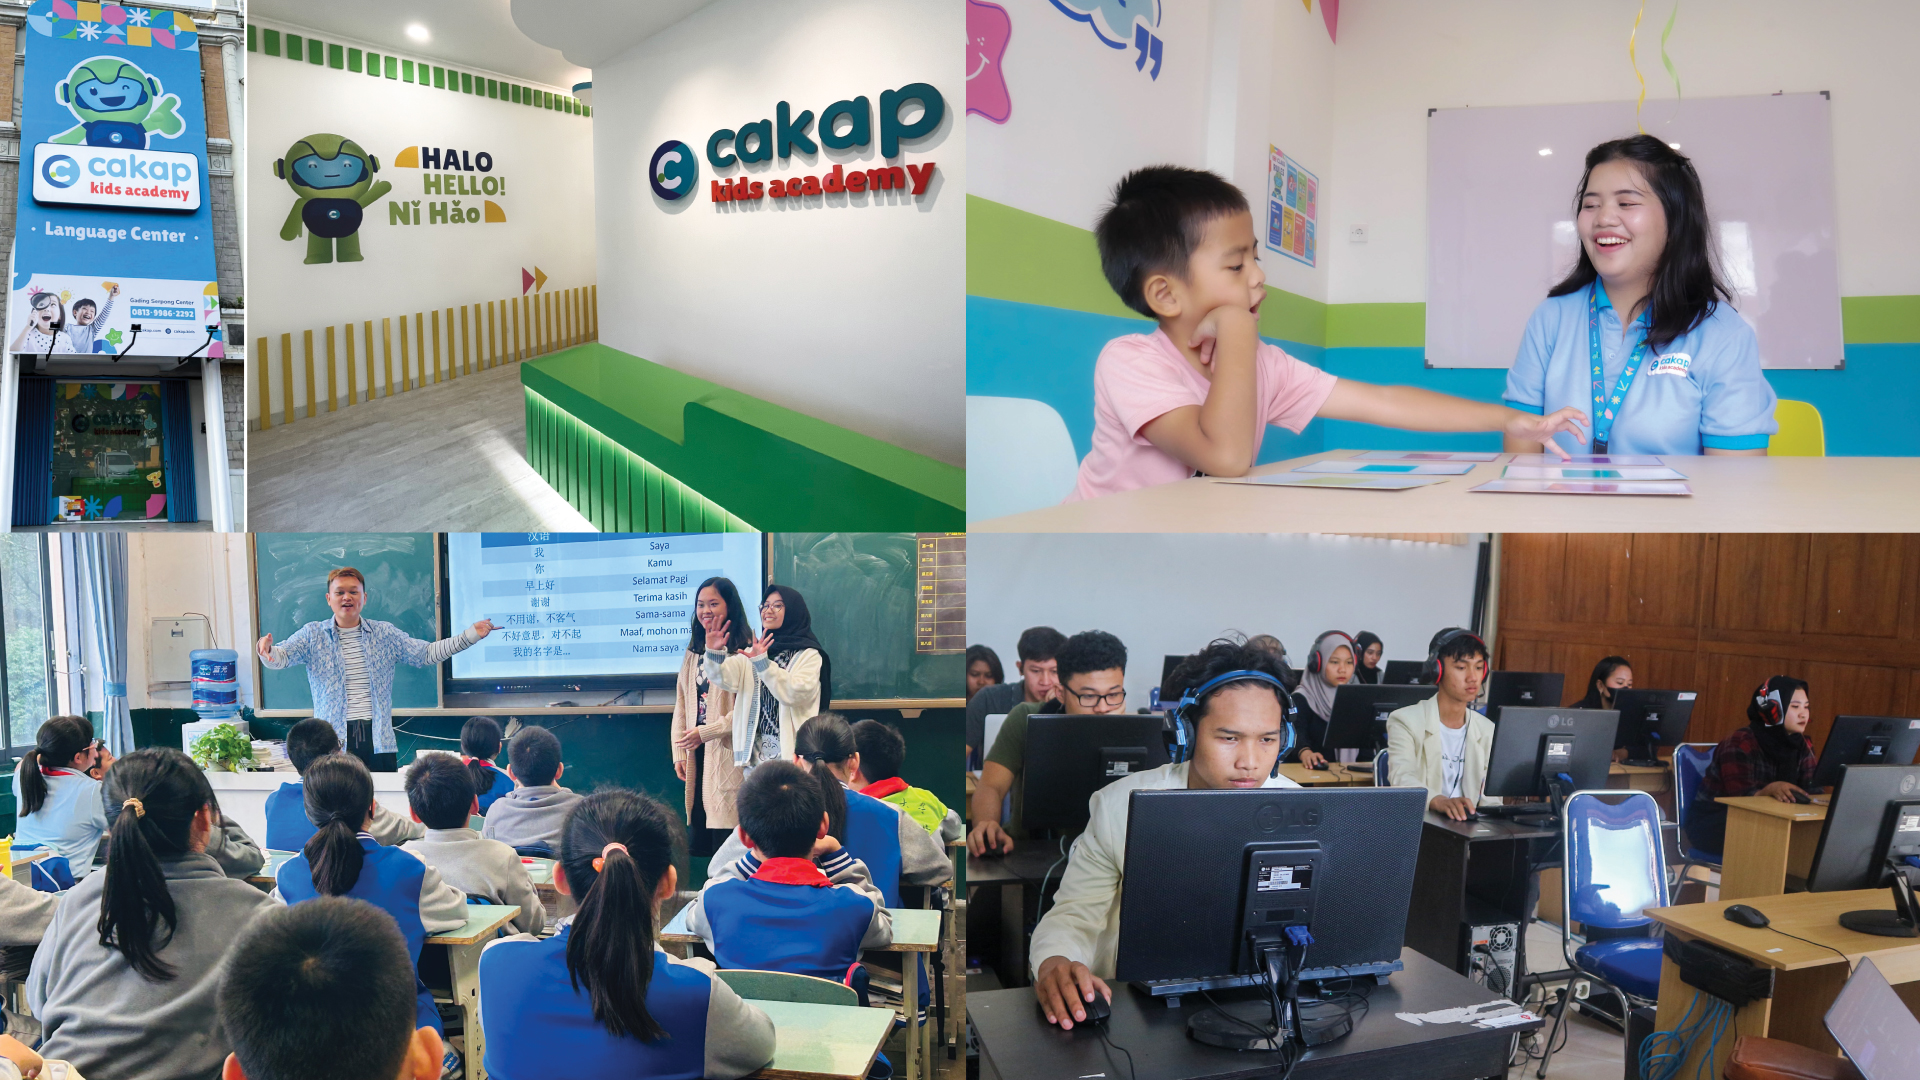 Top, Left-Right: Cakap Kids Academy (CKA) facility, Student learning with a teacher at the CKA;Bottom, Left-Right: Bima-a Cakap teacher tutoring students in China, Students of Bina Trada Politeknik Semarang, undergo the Cakap English Standardized Test (CEST)